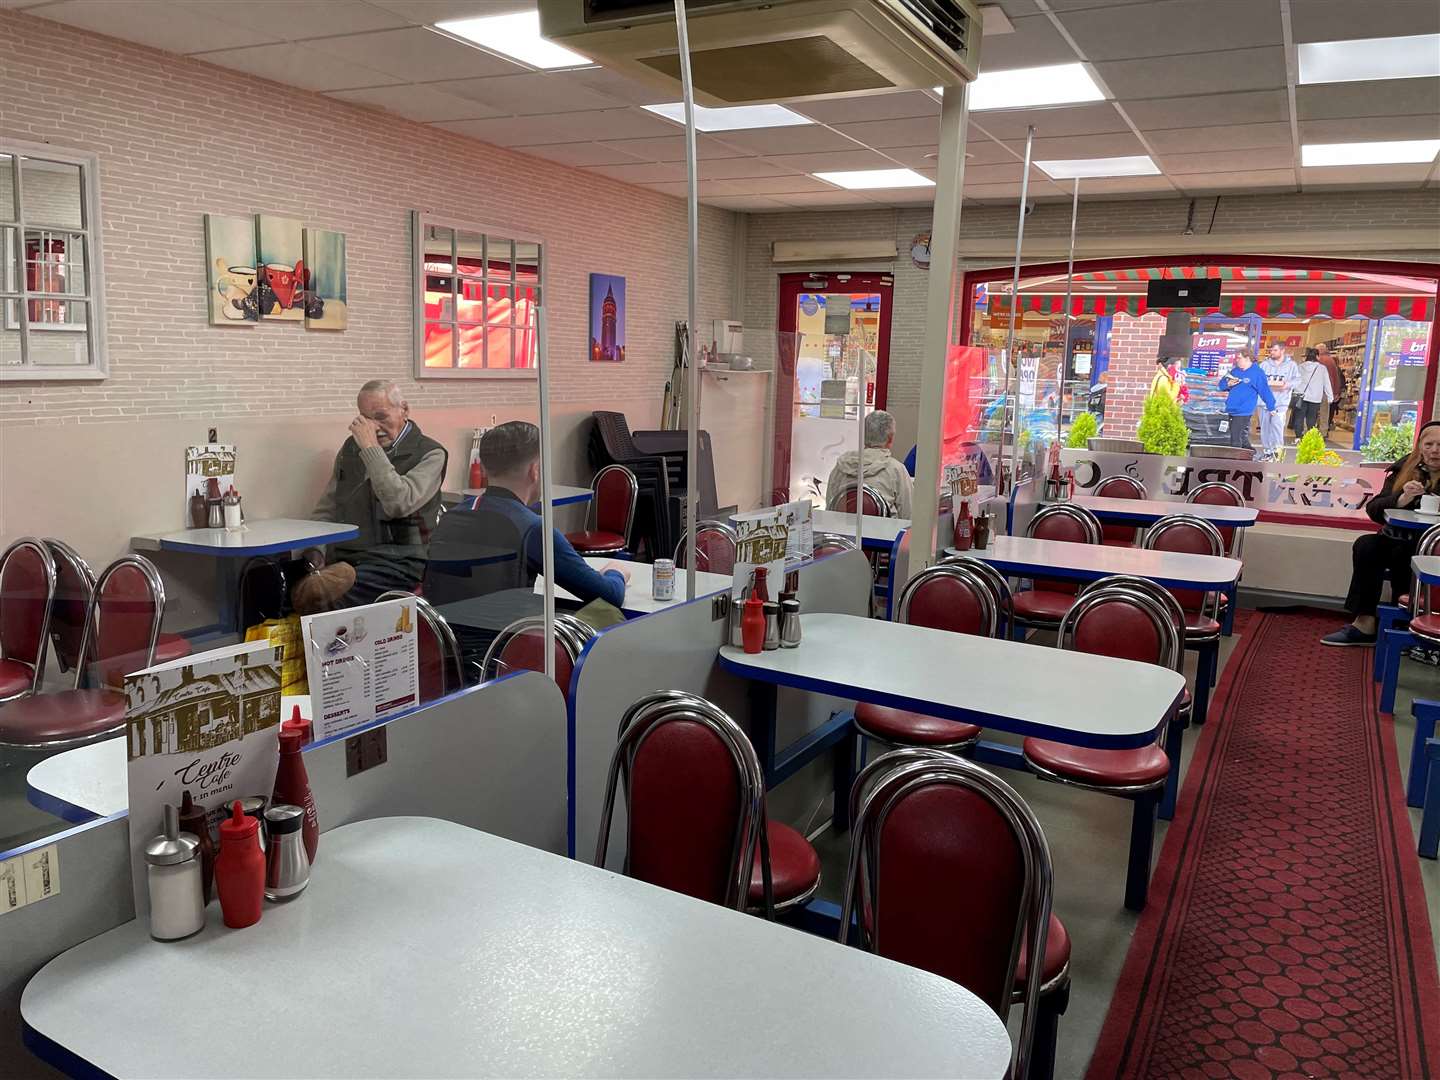 Inside Centre Cafe at around lunchtime last Tuesday